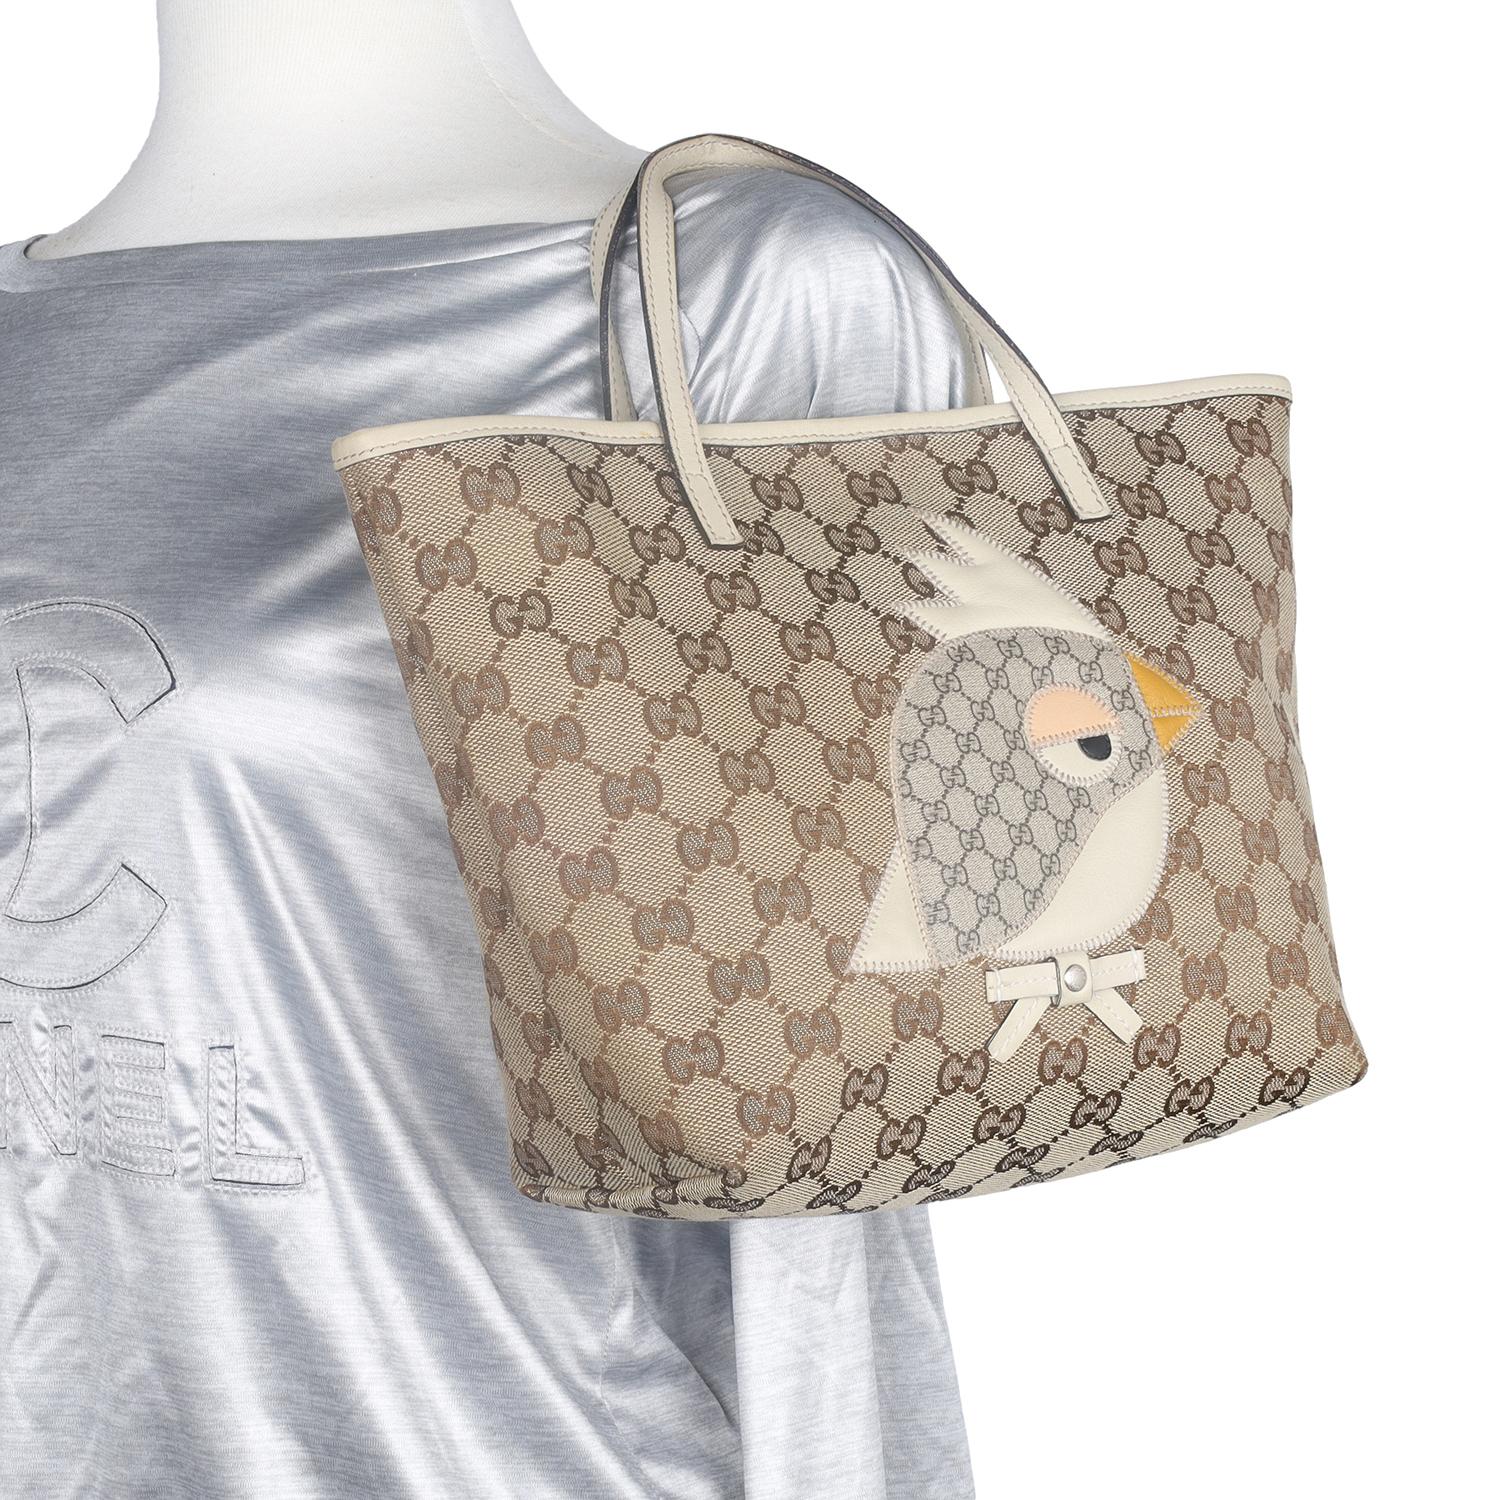 Authentic, pre-loved Gucci GG brown monogram zoo tote for adult or child.  This chic Gucci tote bag is a must-have for Gucci lovers and children. The roomy interior is ideal for everyday necessities with the sophisticated style of Gucci. You won't